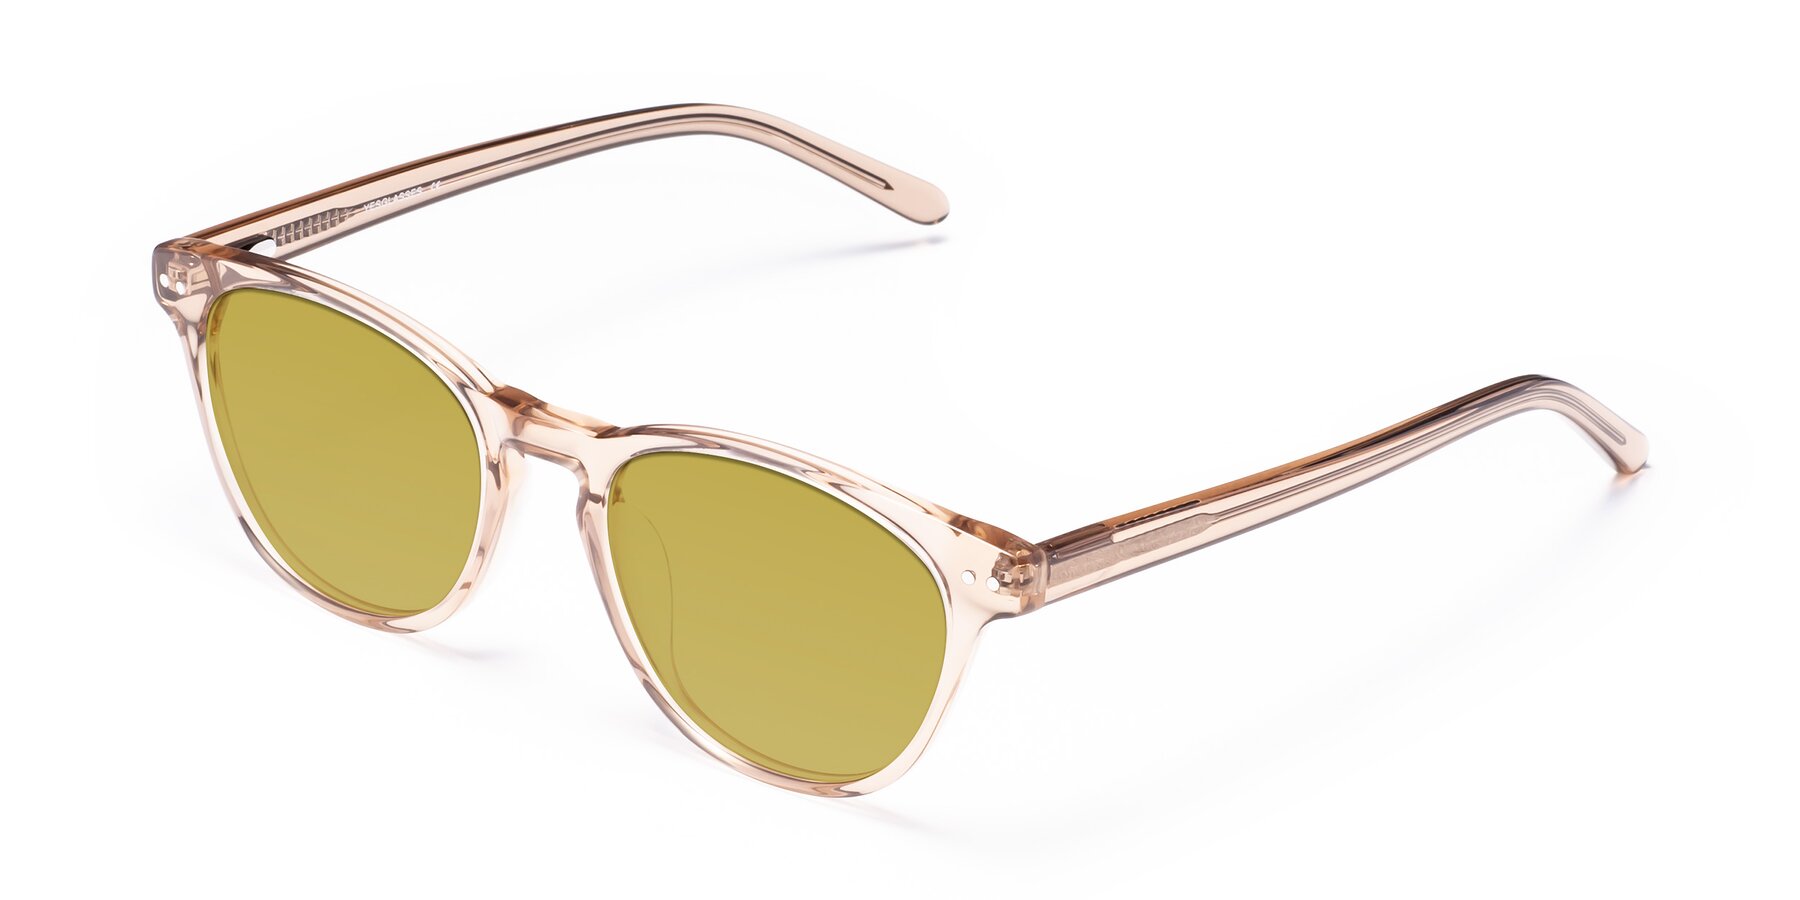 Angle of Blaze in light Brown with Champagne Tinted Lenses